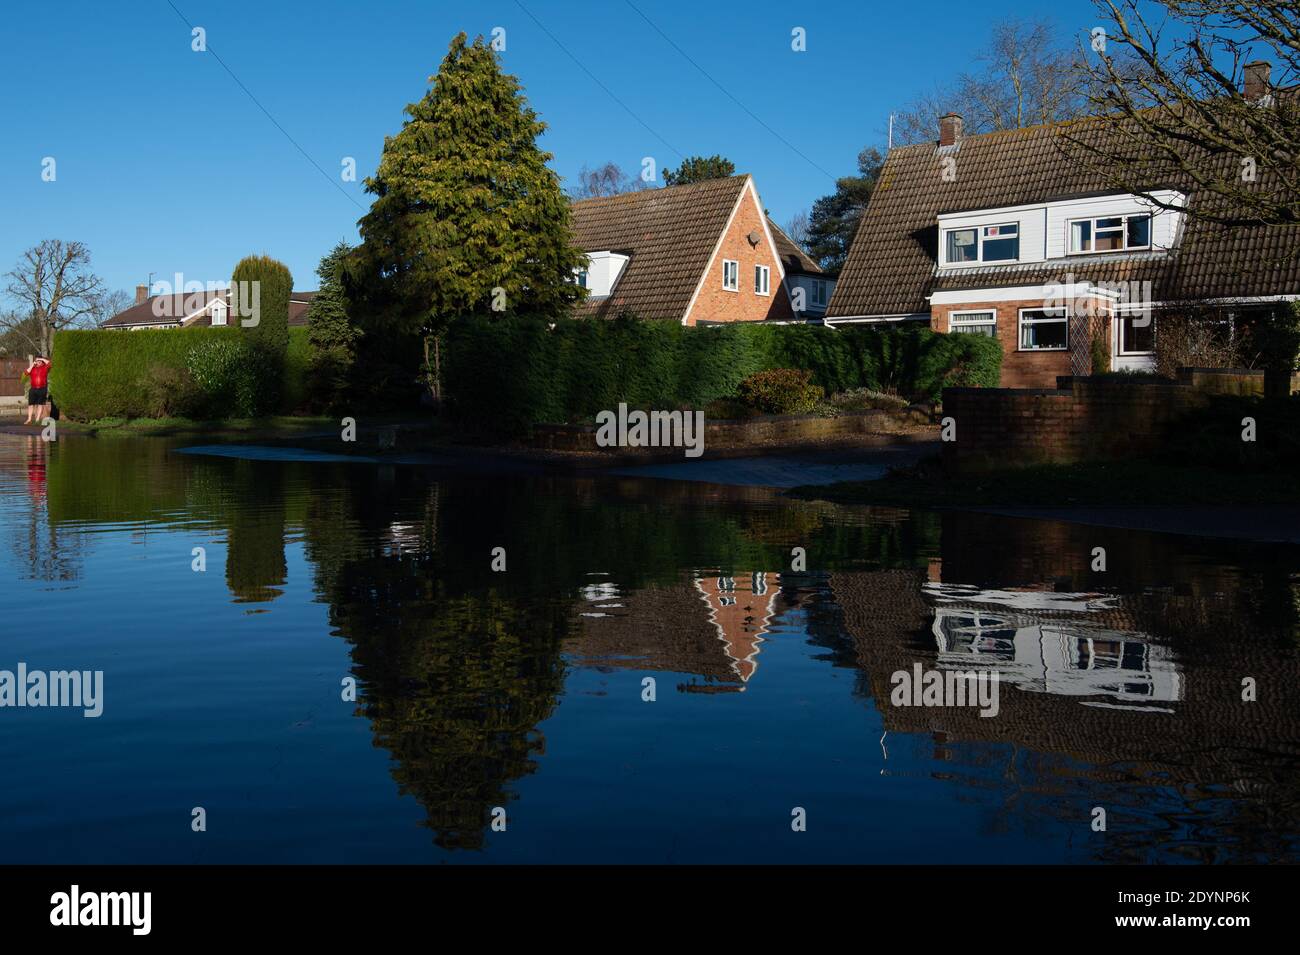 Flooding in Great Barford in Bedfordshire, after residents living near the River Great Ouse in north Bedfordshire were 'strongly urged' to seek alternative accommodation due to fears of flooding. Stock Photo